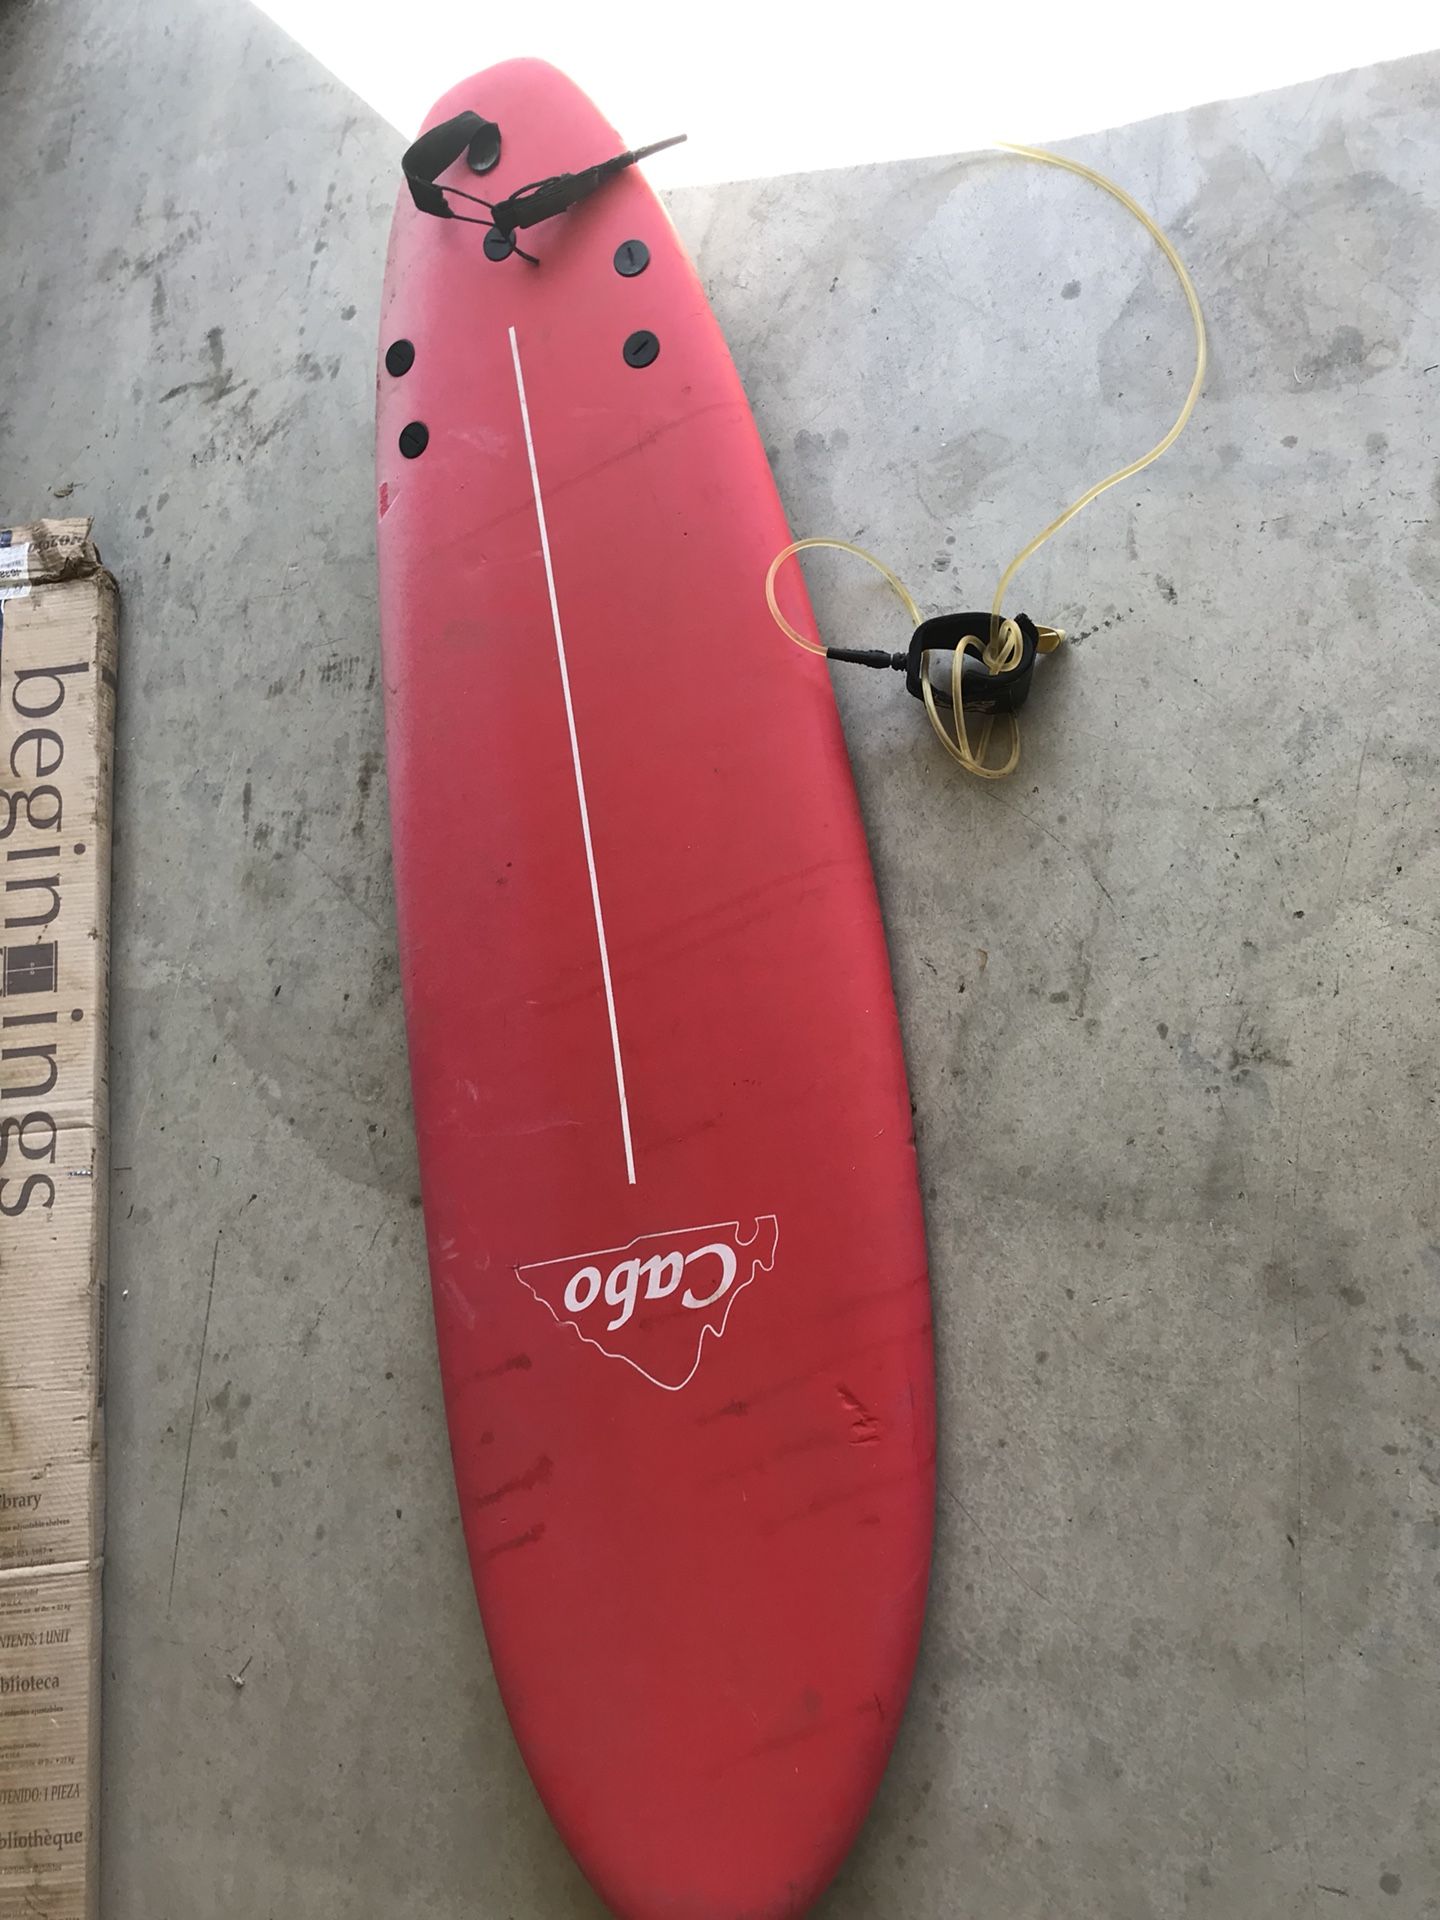 Cabo soft top surfboard